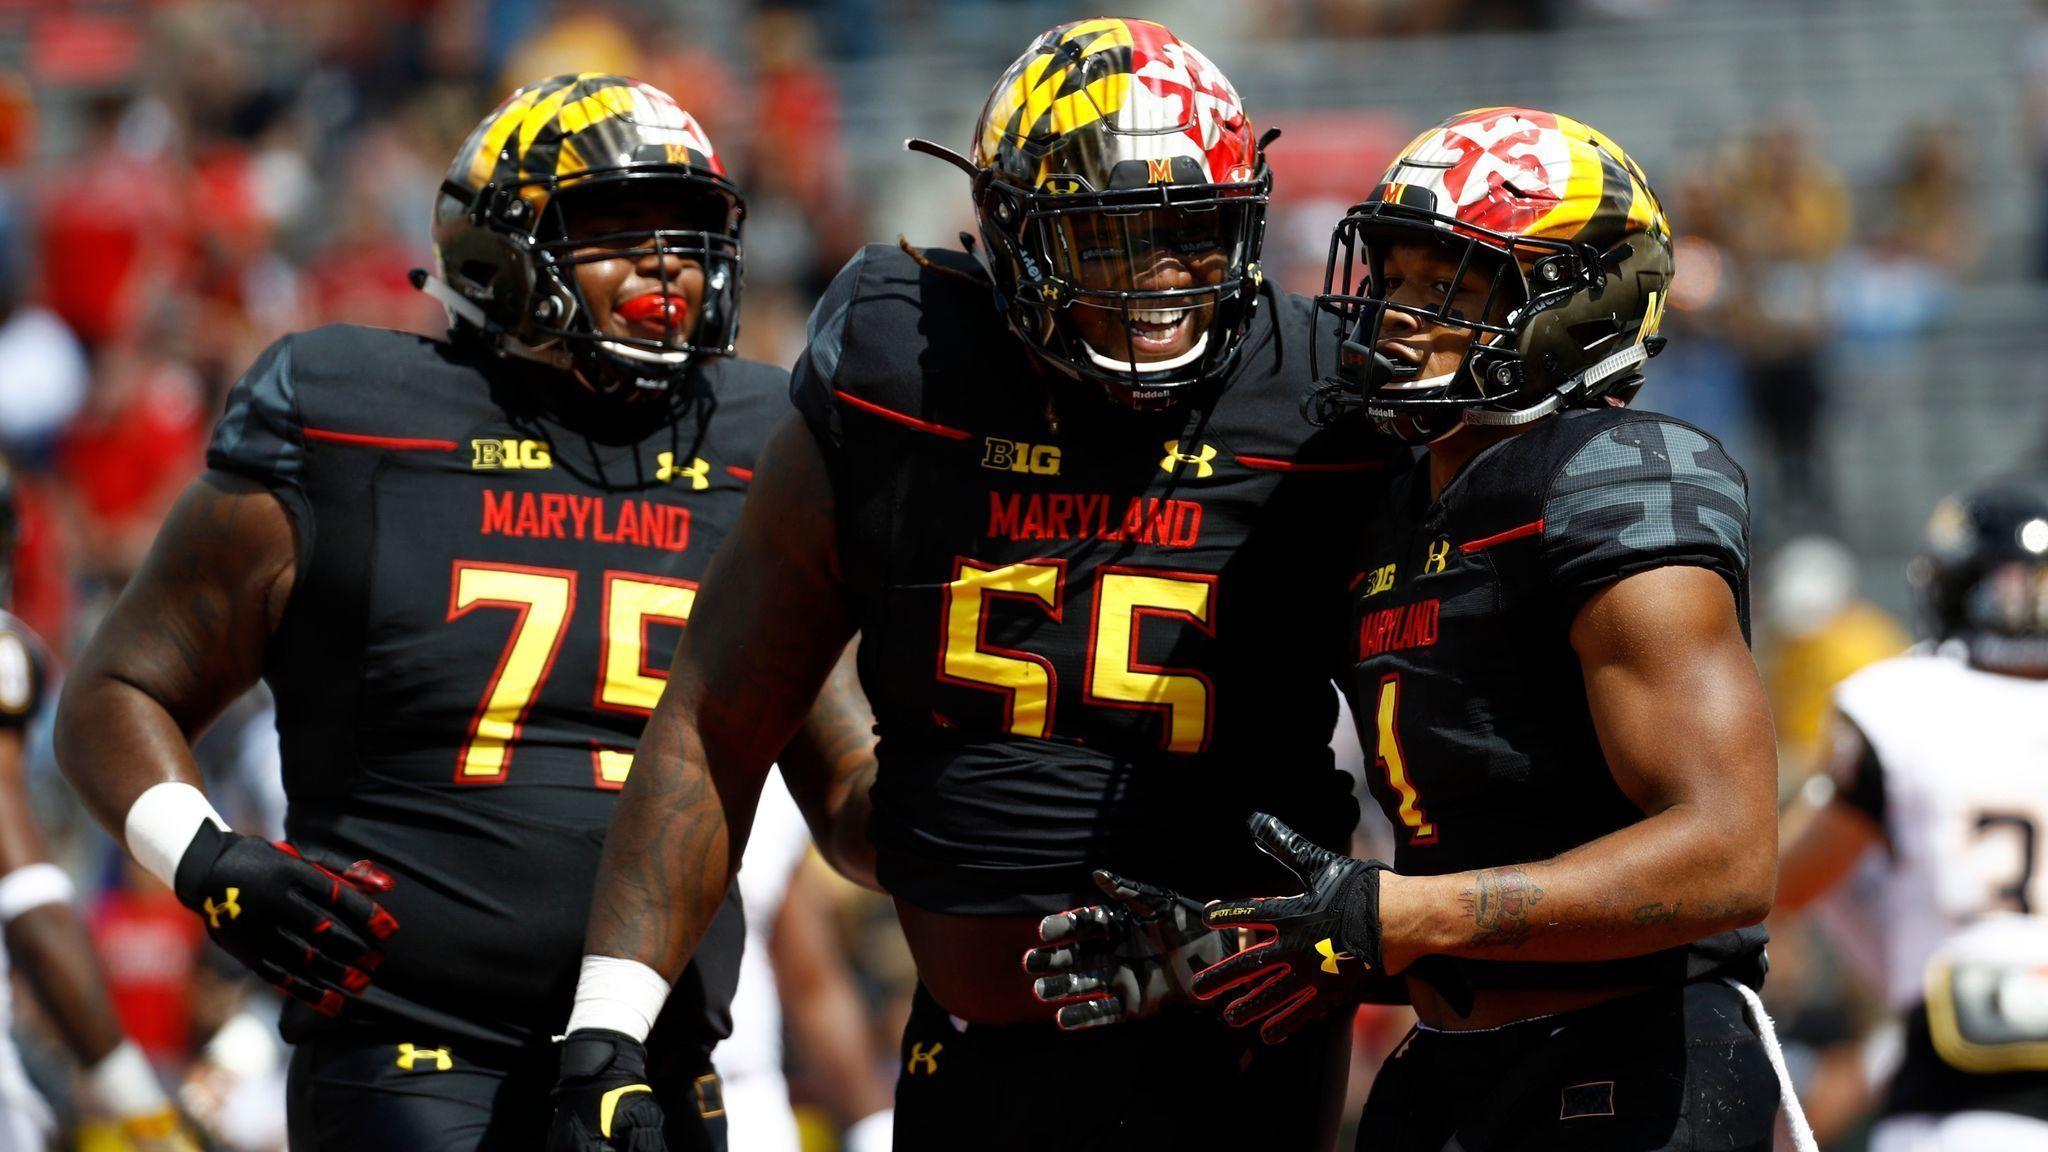 Maryland's fast offensive start begins in the trenches